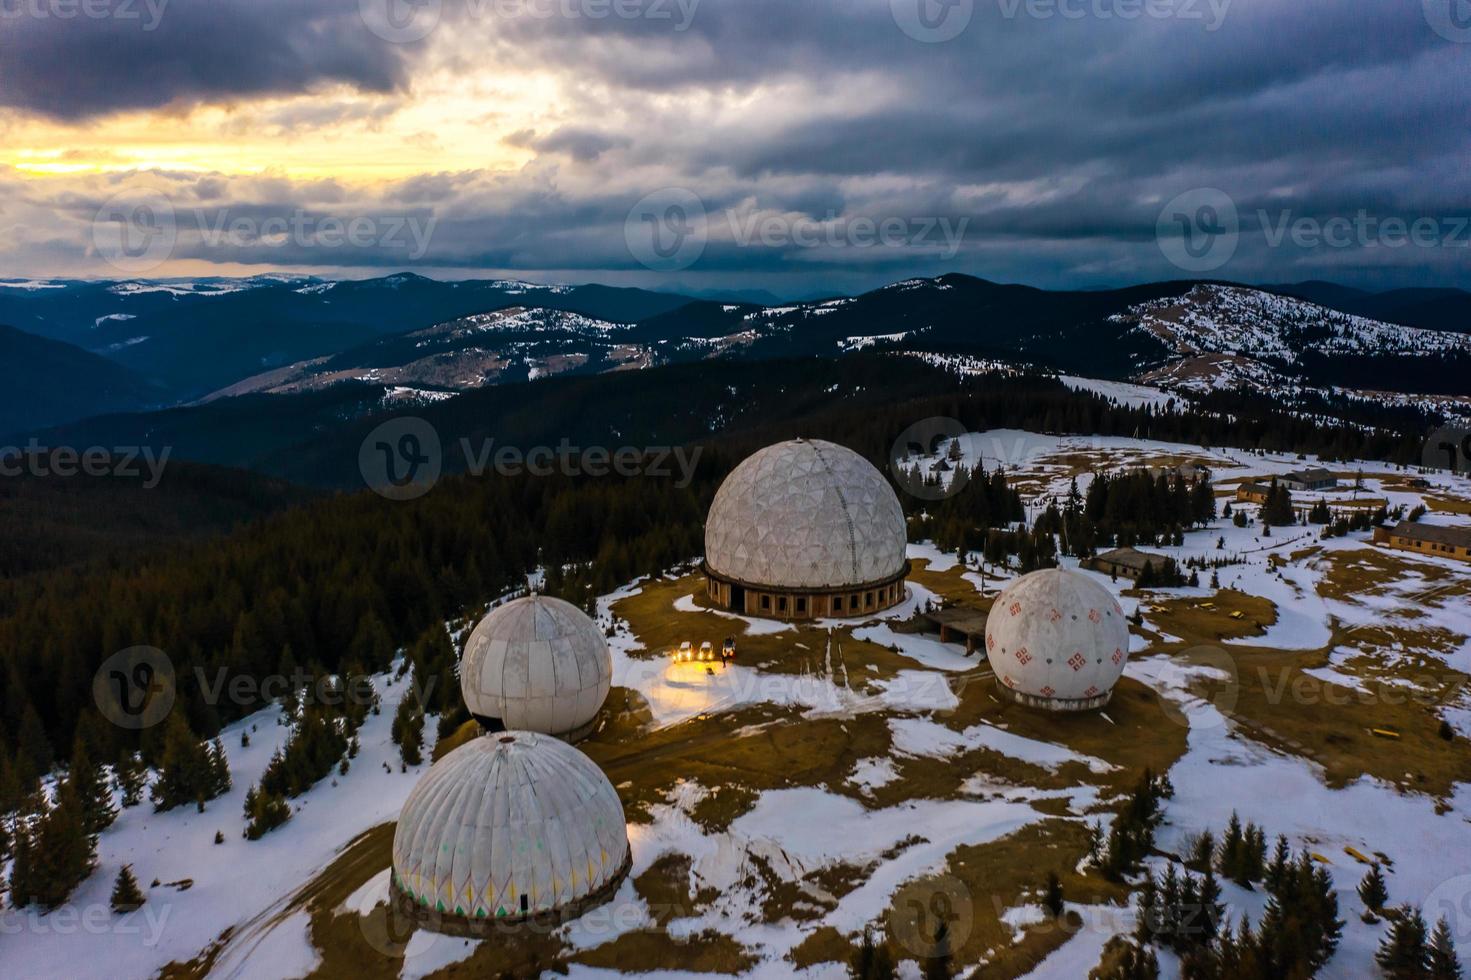 Pamir - abandoned secret Army radar station. In the Carpathians, on the border with Romania photo